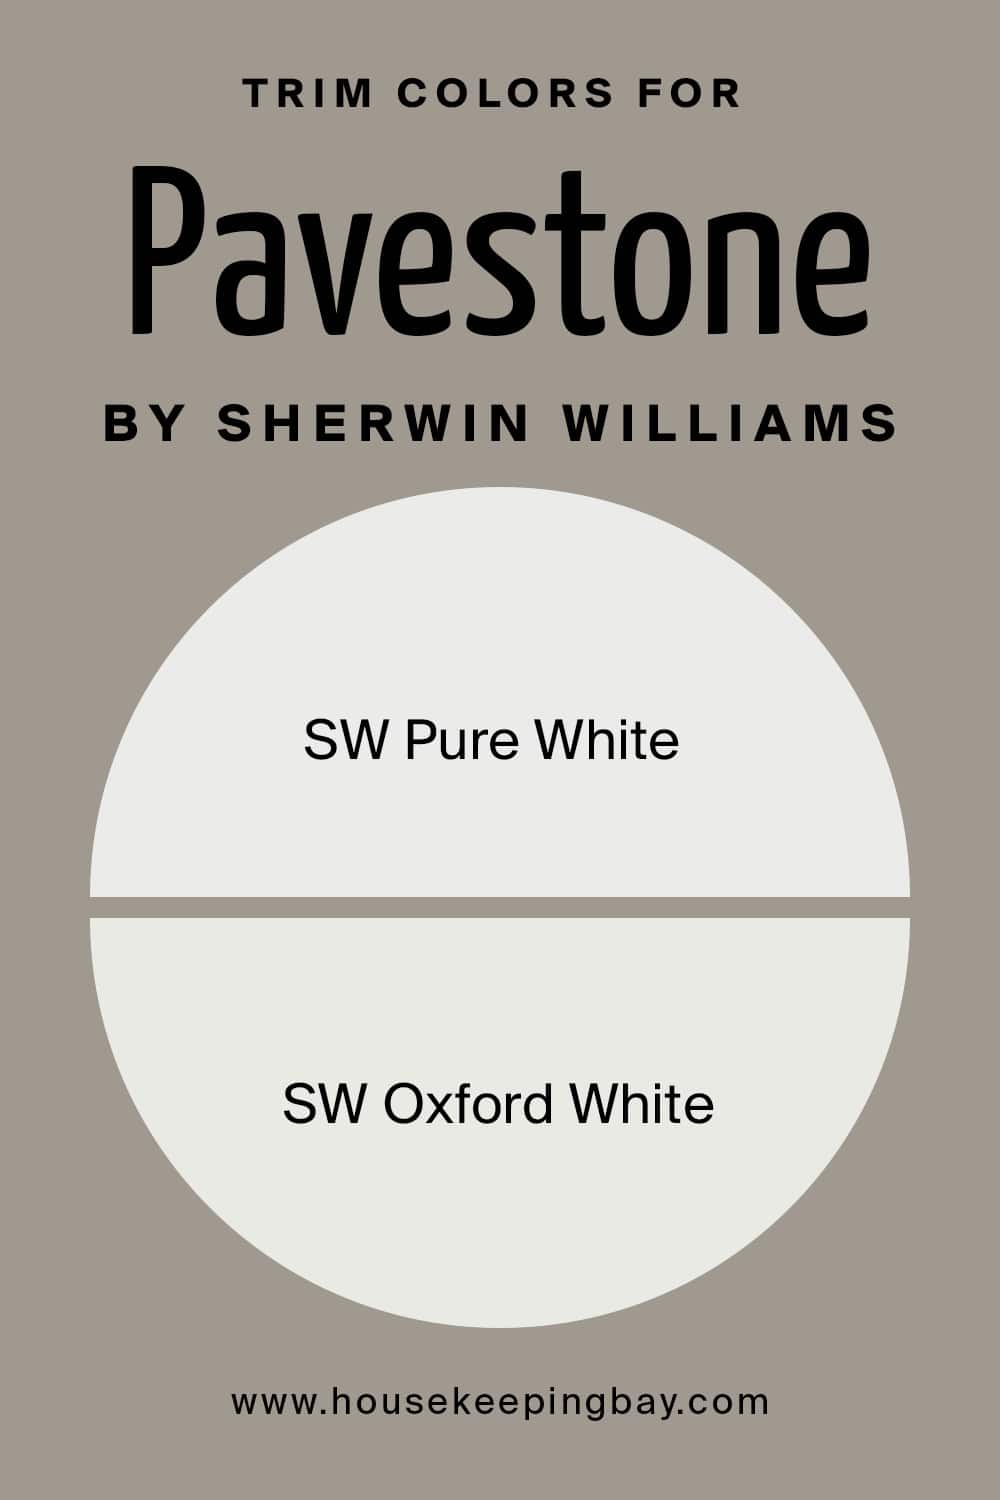 Trim Colors for Pavestone by Sherwin Williams